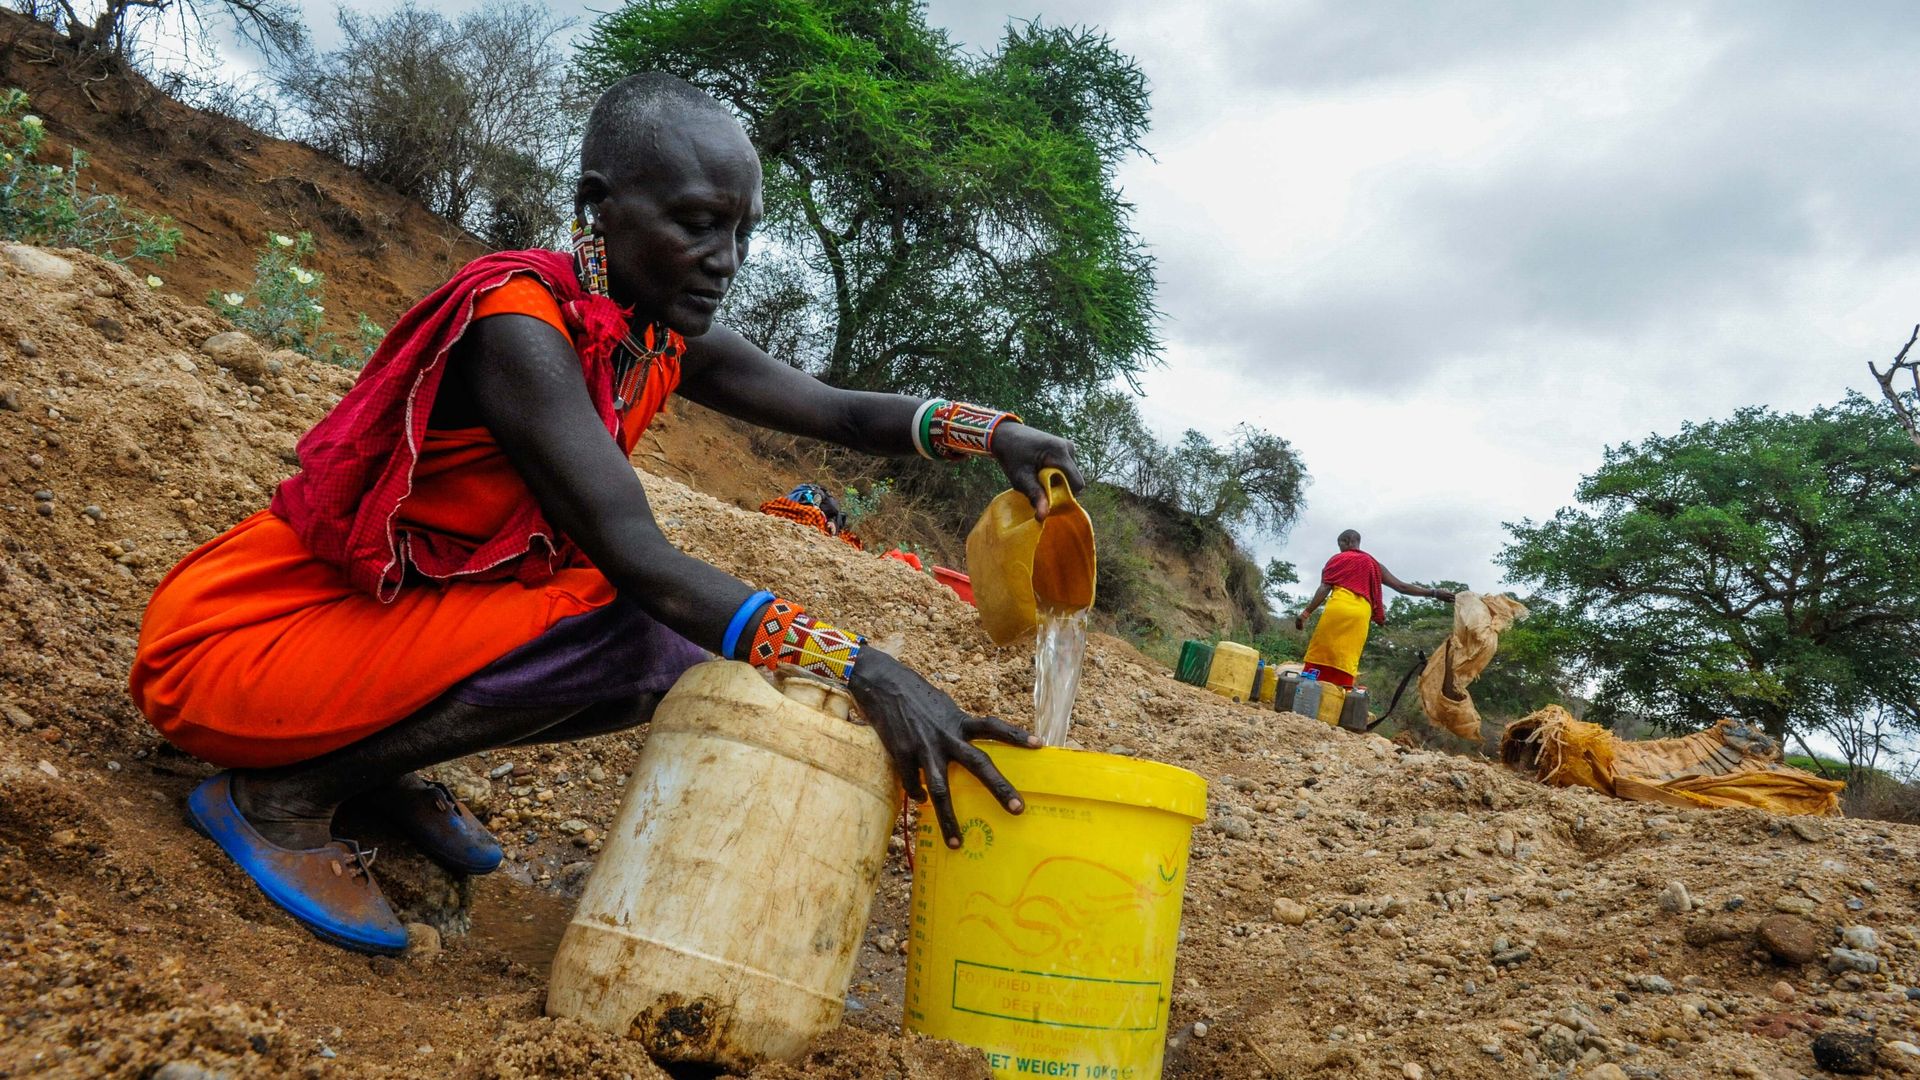 A woman tries to get clean water in Kajiado, Kenya, during a severe drought.